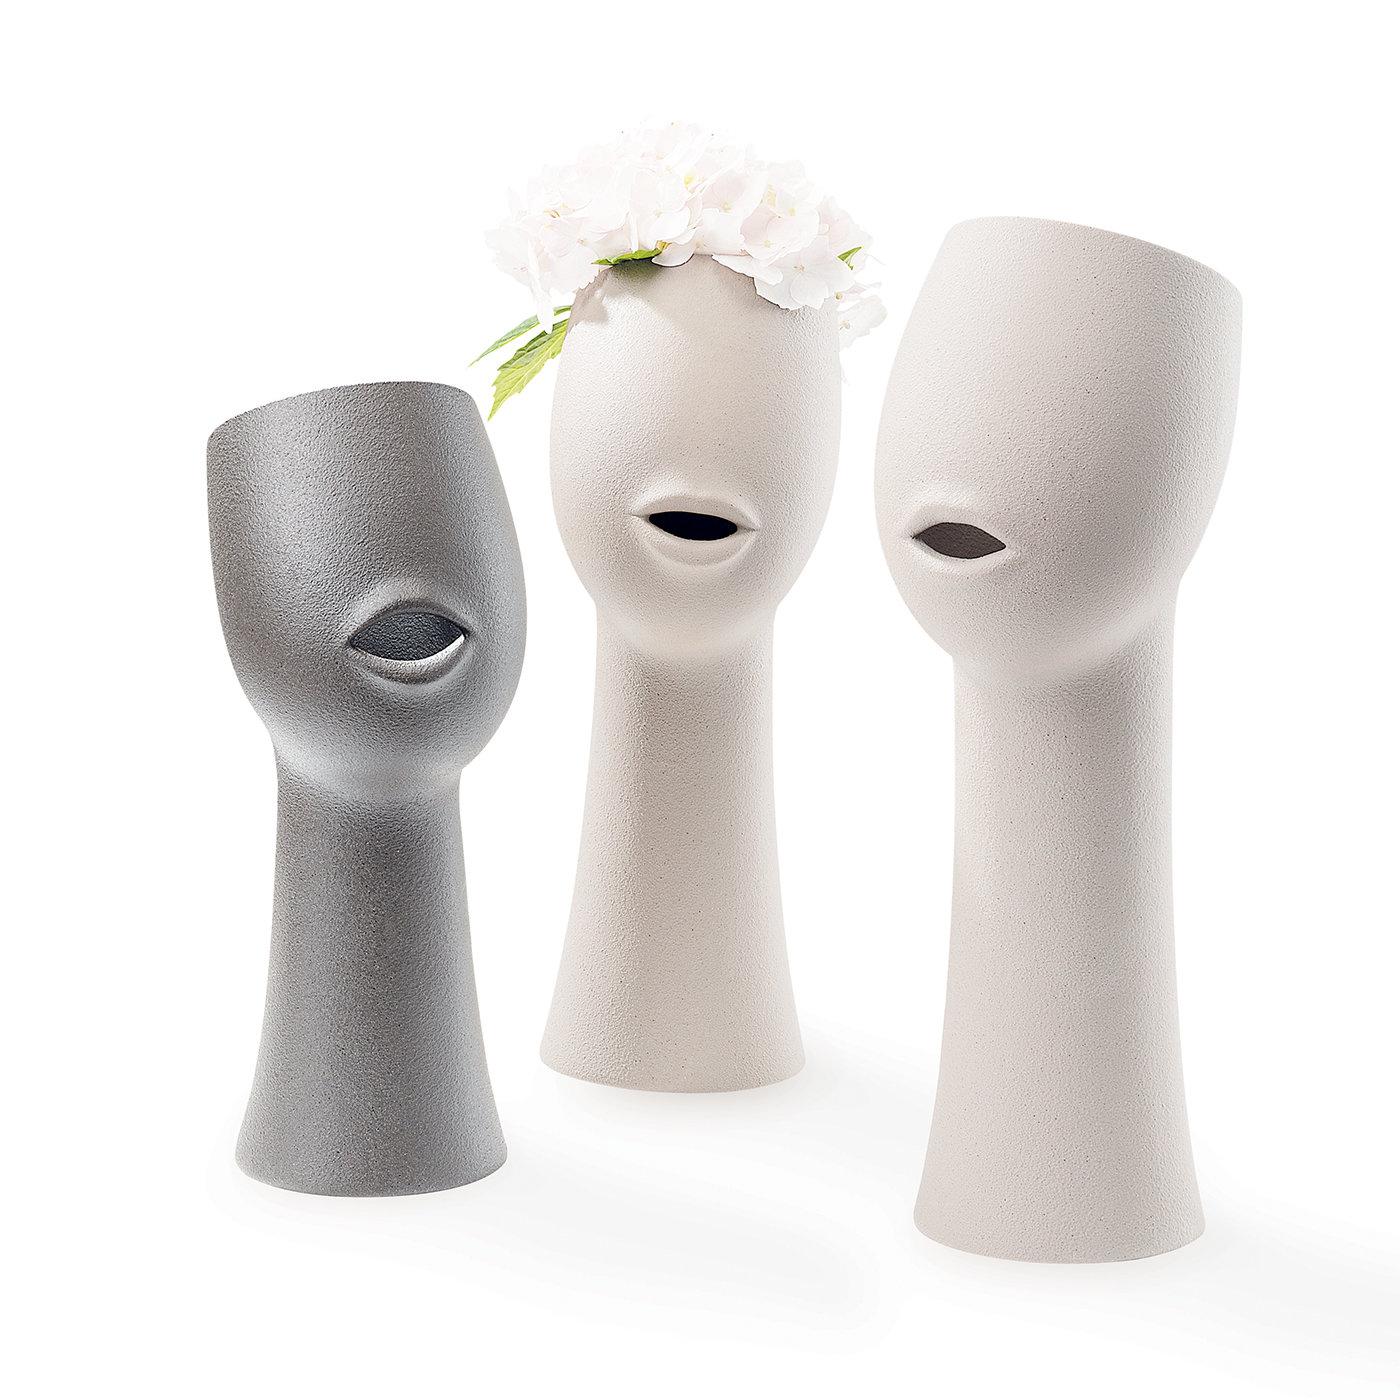 Delightfully unique, the Woman Vase by Giuseppe Bucco will compliment any contemporary setting. Characterized by the form of a neck and face and featuring a small opening in the shape of a mouth, this fascinating Woman Vase is 43 cm tall and crafted